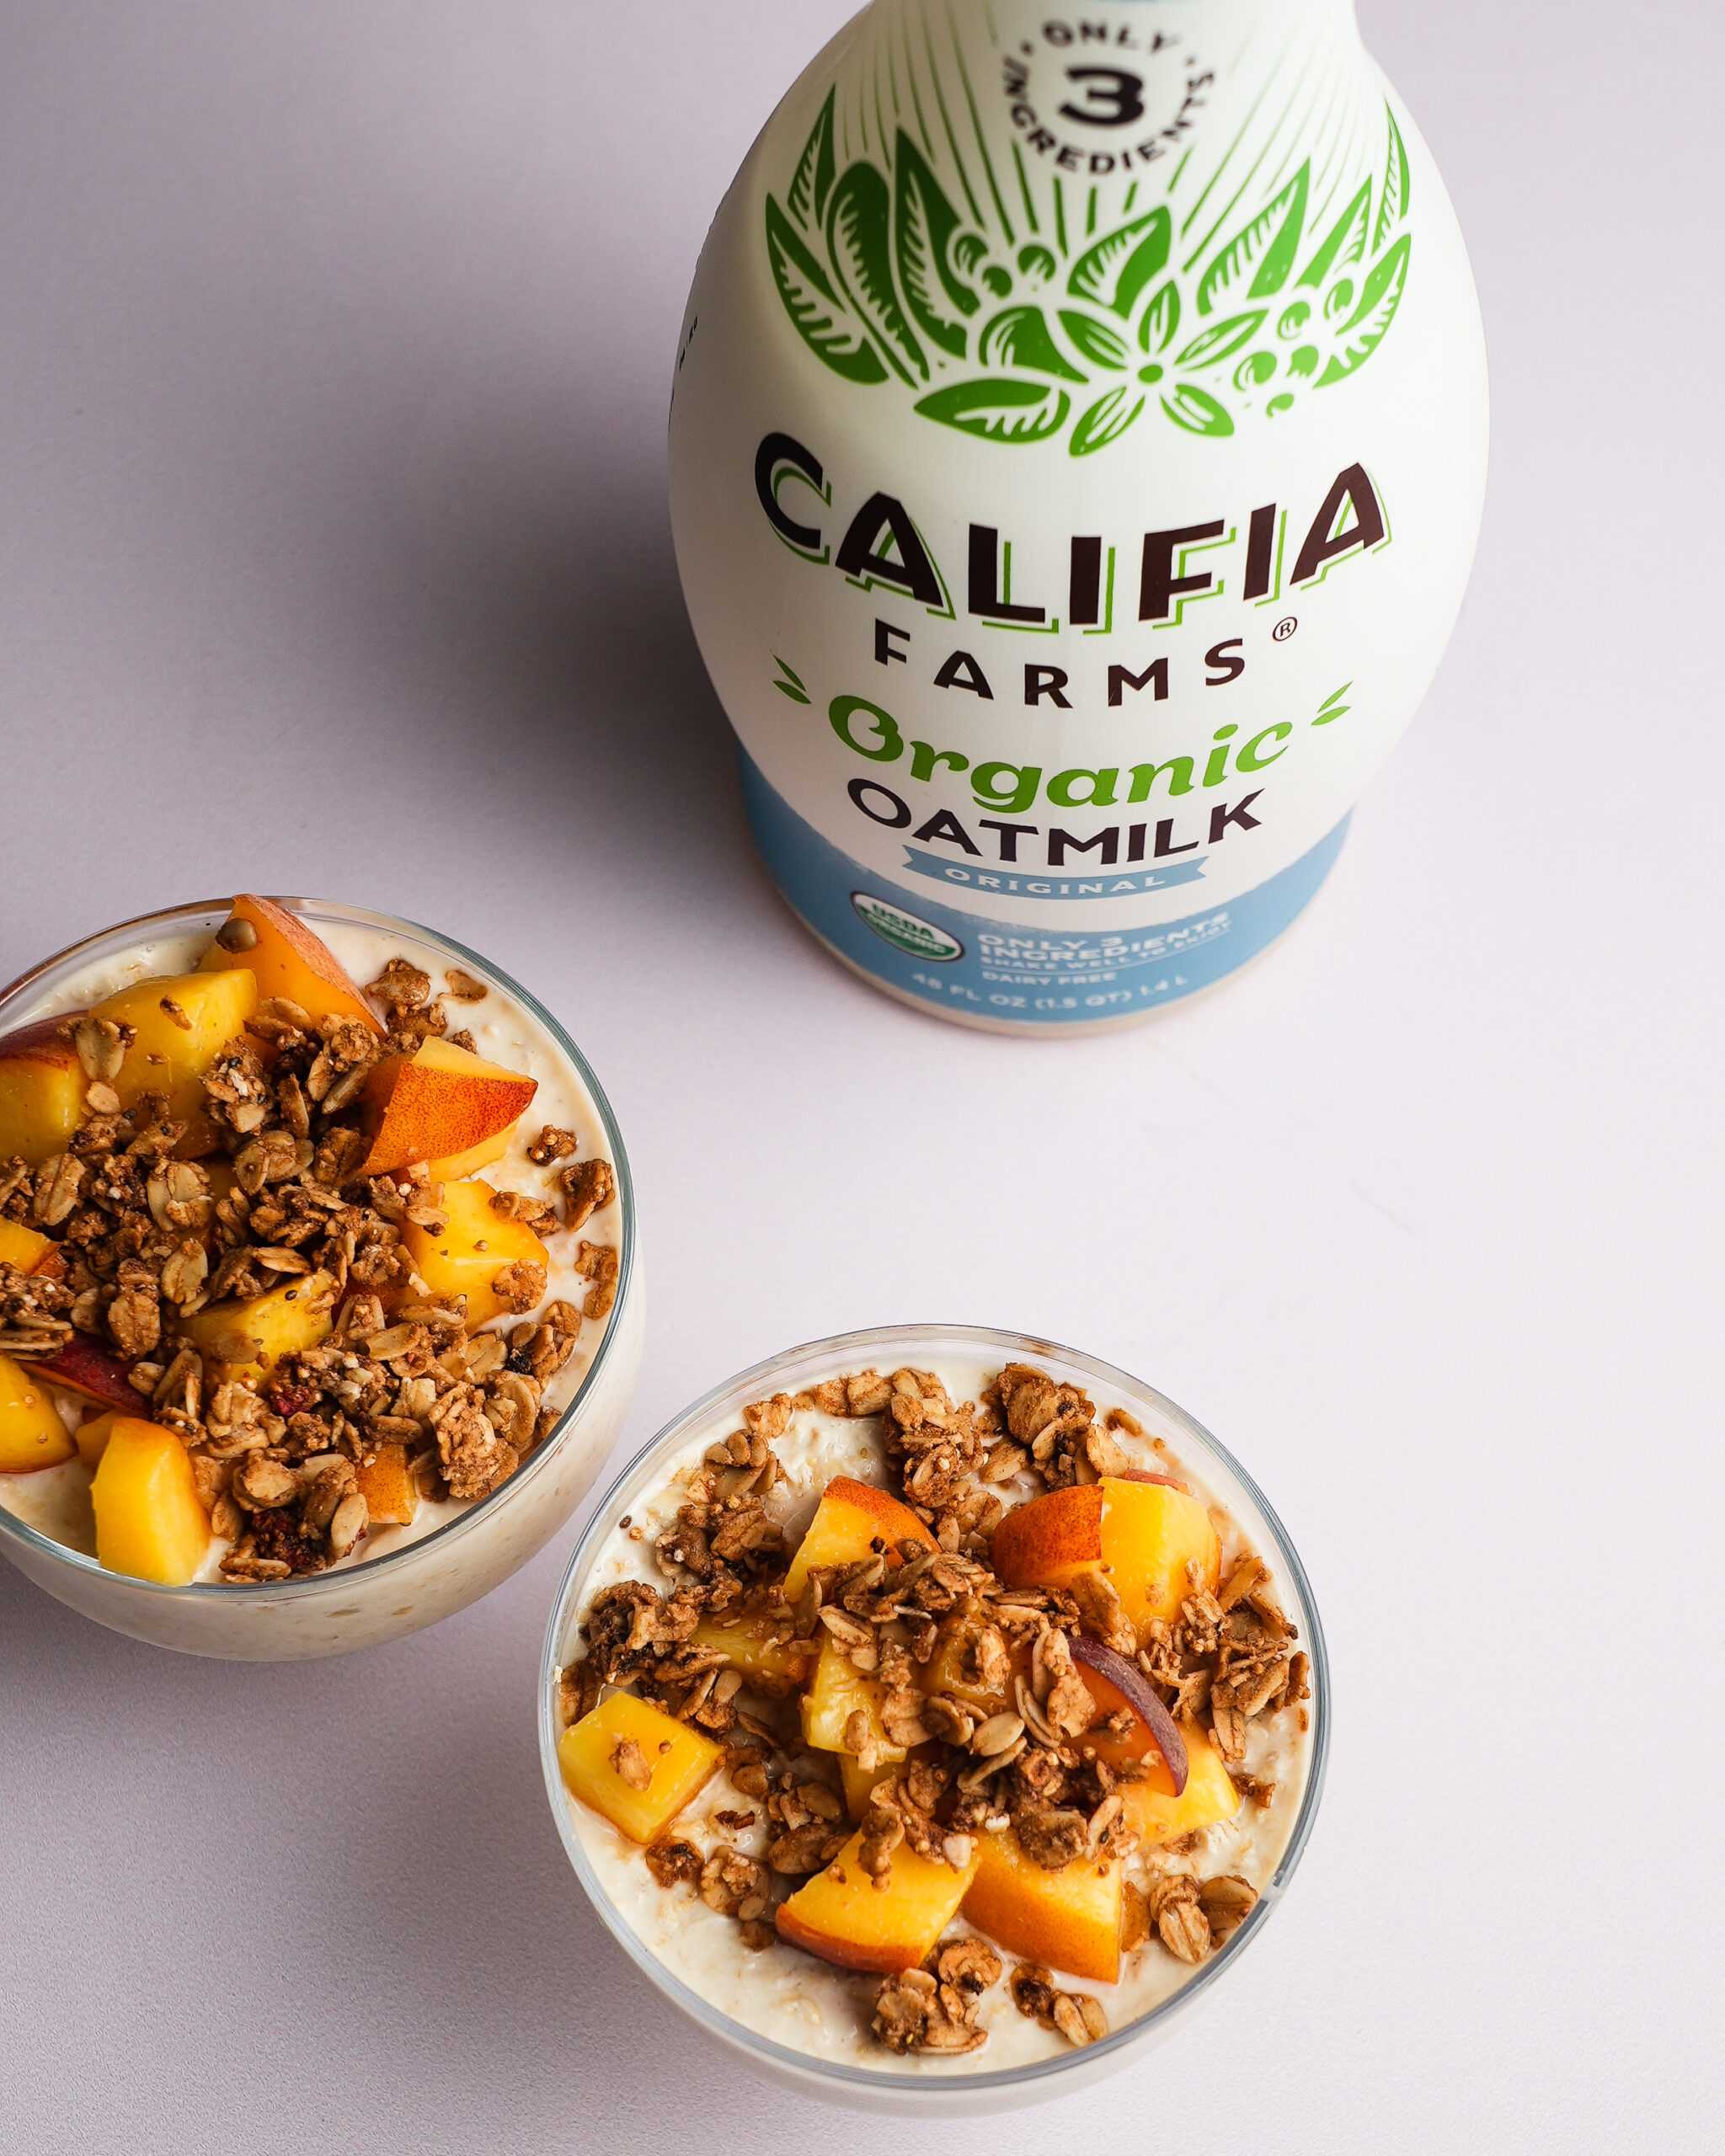 Overnight oats with peaches and granola topping sit in the front of the image, with Califia Farms Organic Oatmilk behind.